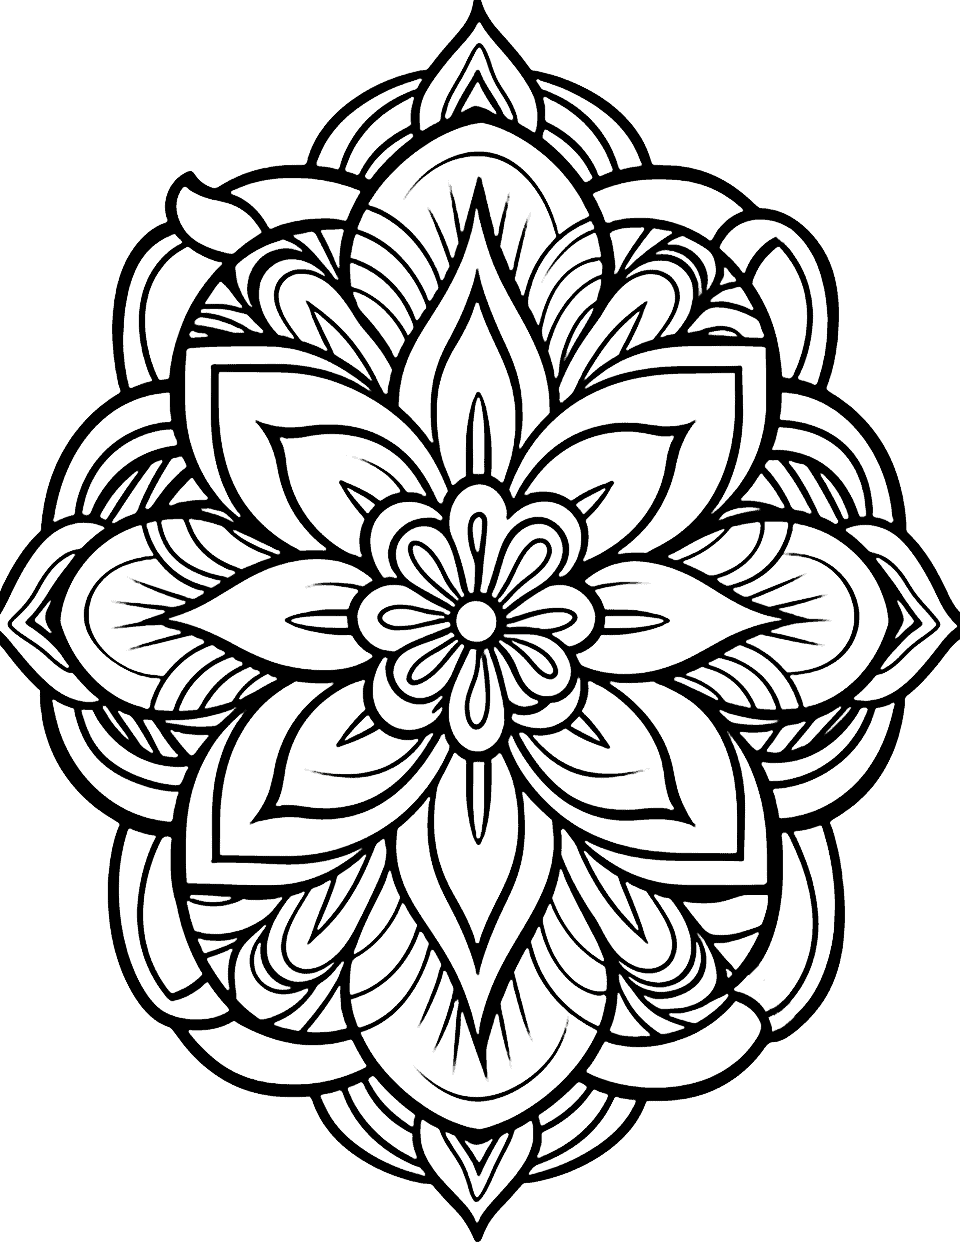 Flower Mandala Adult Coloring Page - A detailed mandala featuring geometric shapes, flowers, and leaves.